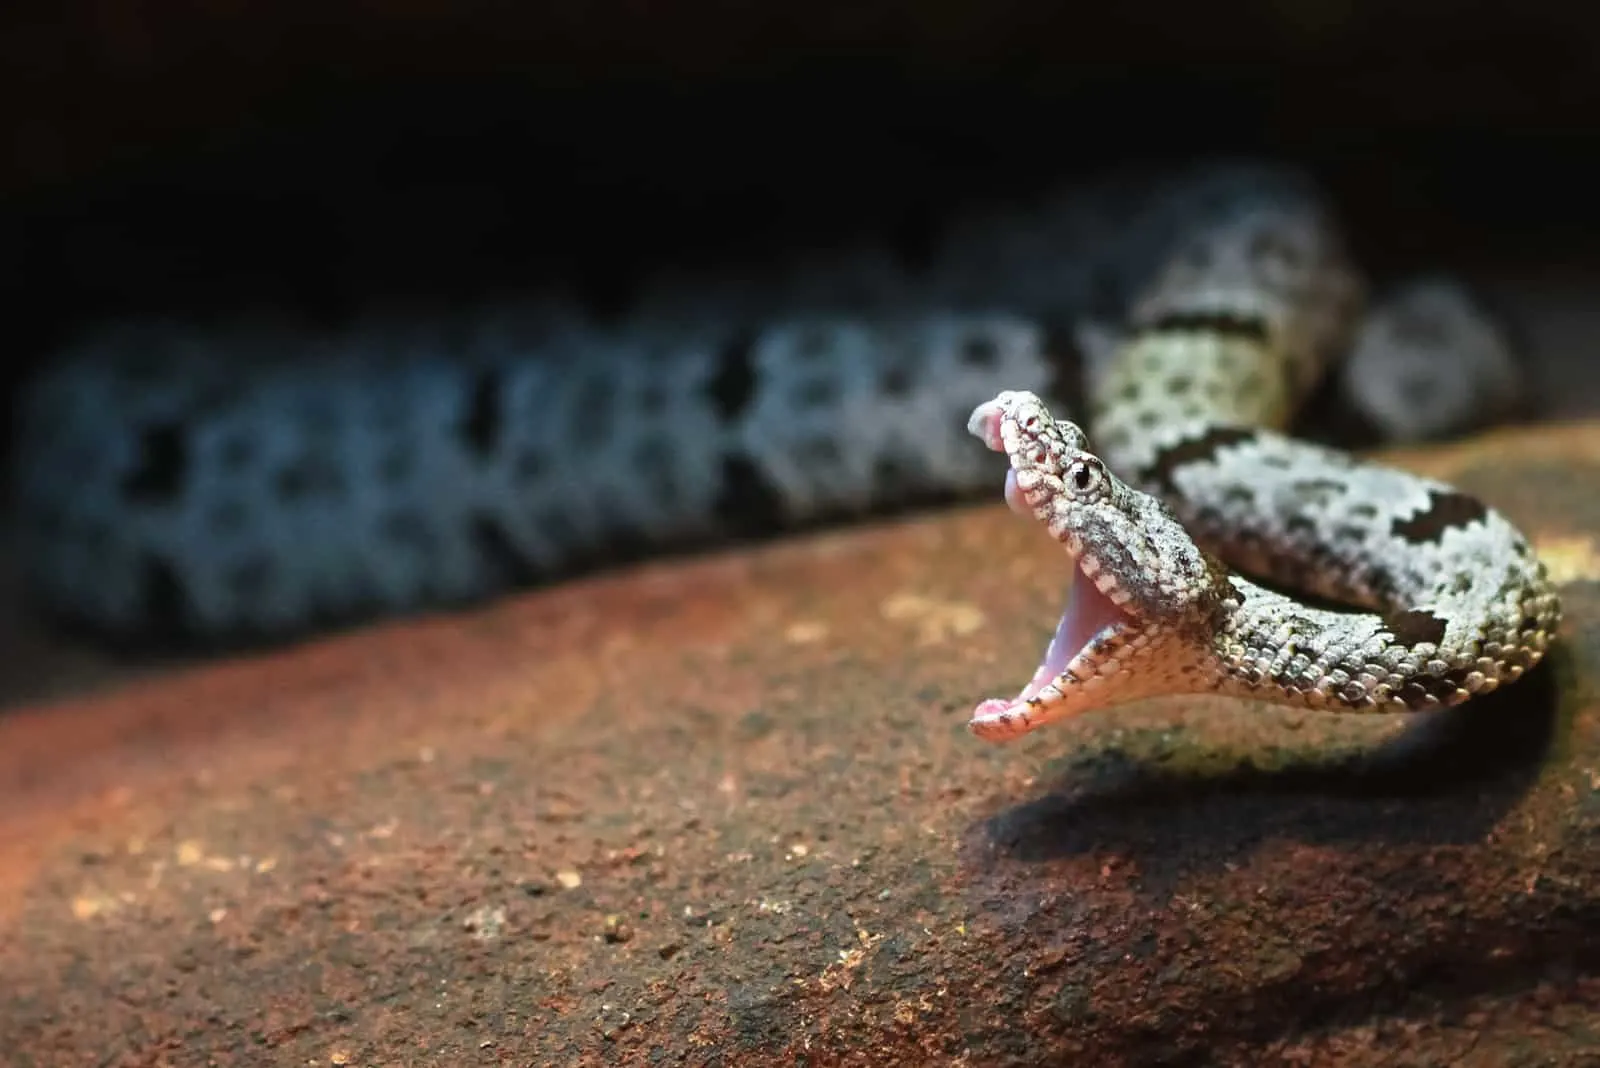 photo of a snake with opened mouth